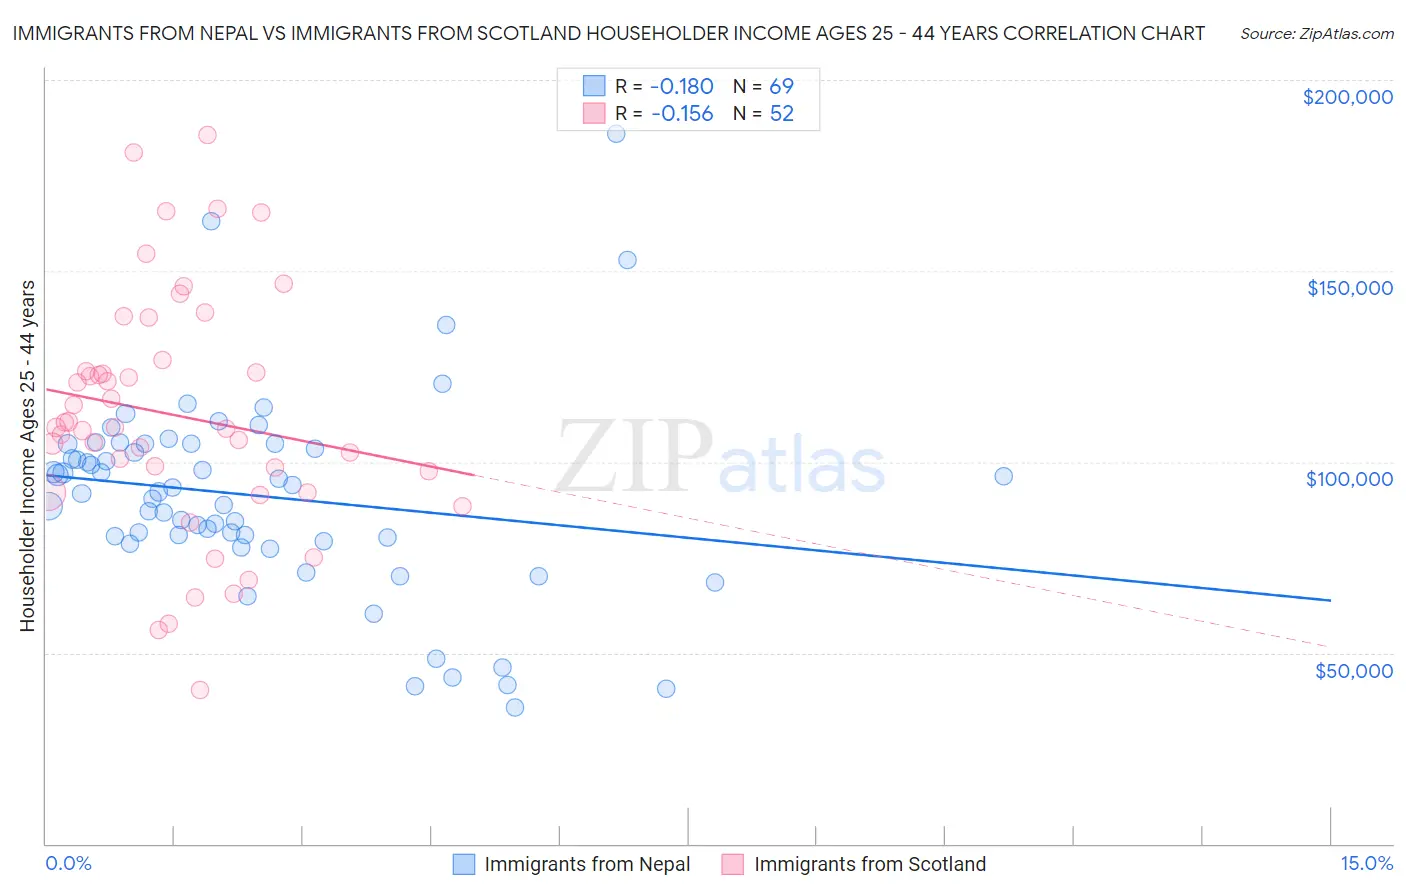 Immigrants from Nepal vs Immigrants from Scotland Householder Income Ages 25 - 44 years